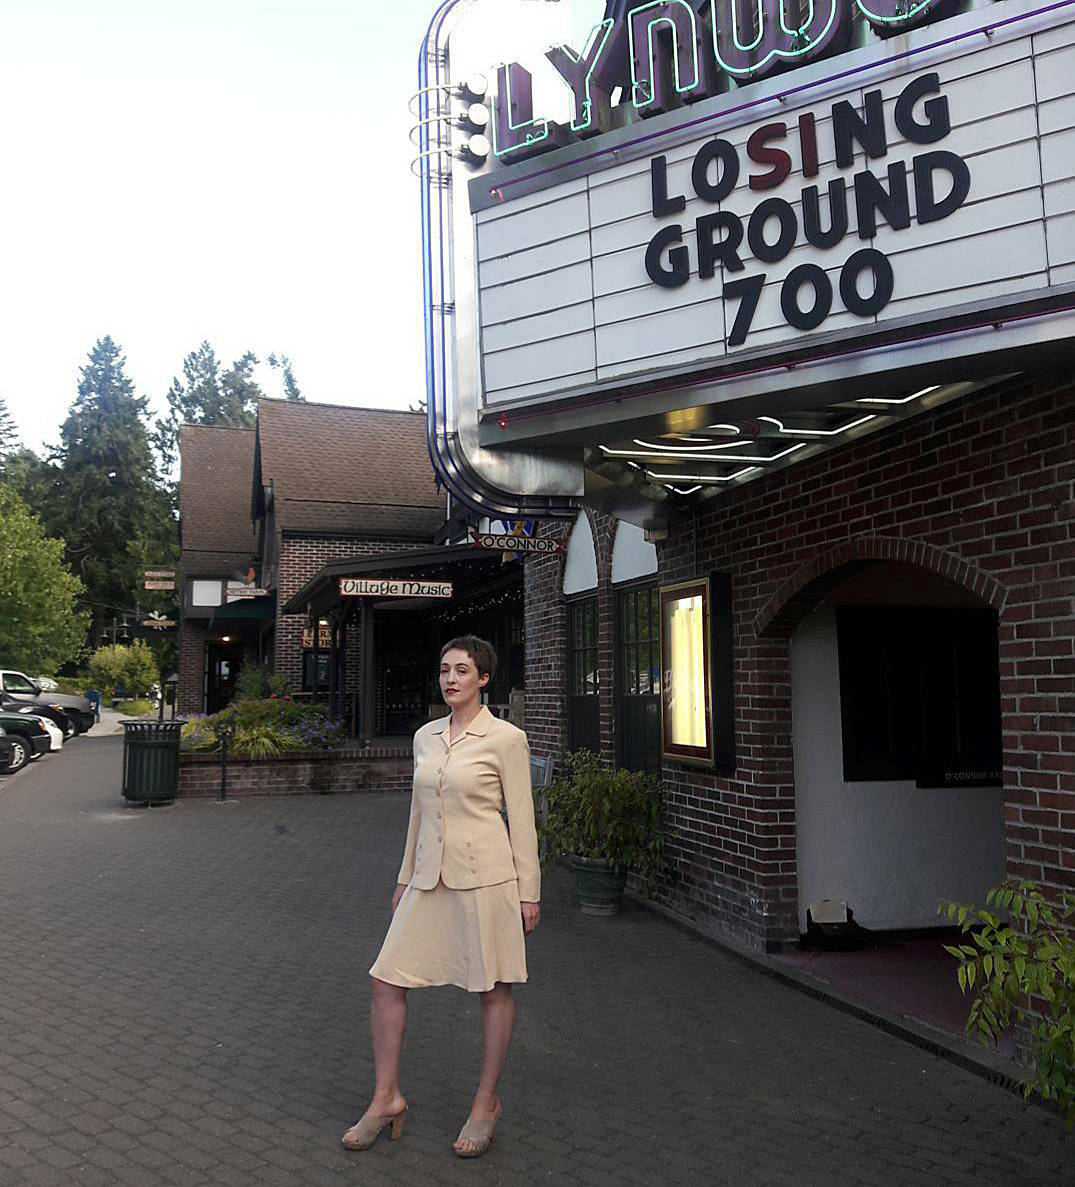 Courtesy photos
Local film curator and essay writer Tova Gannana stands outside the Lynwood Theatre dressed in attire that reflects the times of the movie she’s showing.